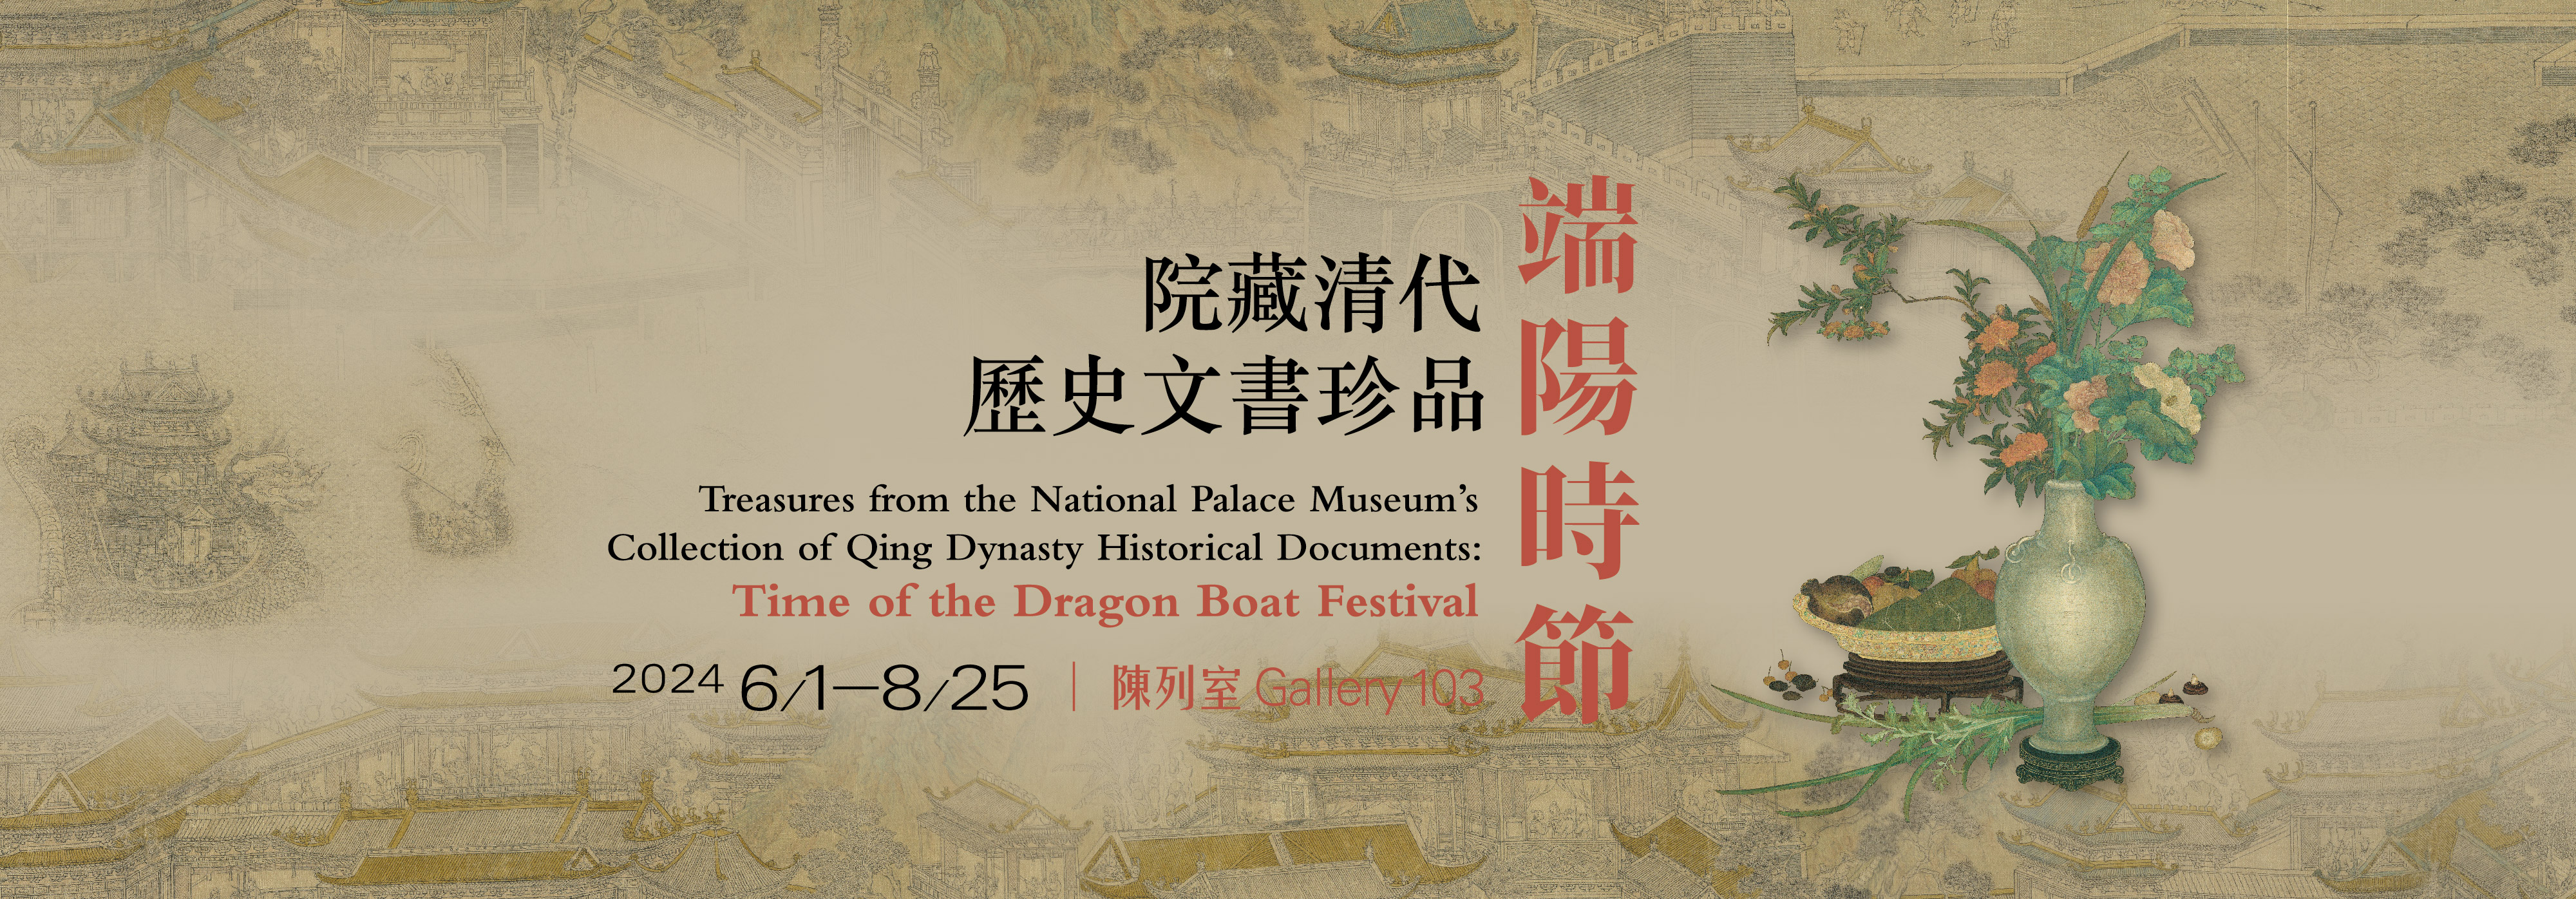 Treasures from the National Palace Museum’s Collection of Qing Dynasty Historical Documents: Time of the Dragon Boat Festival